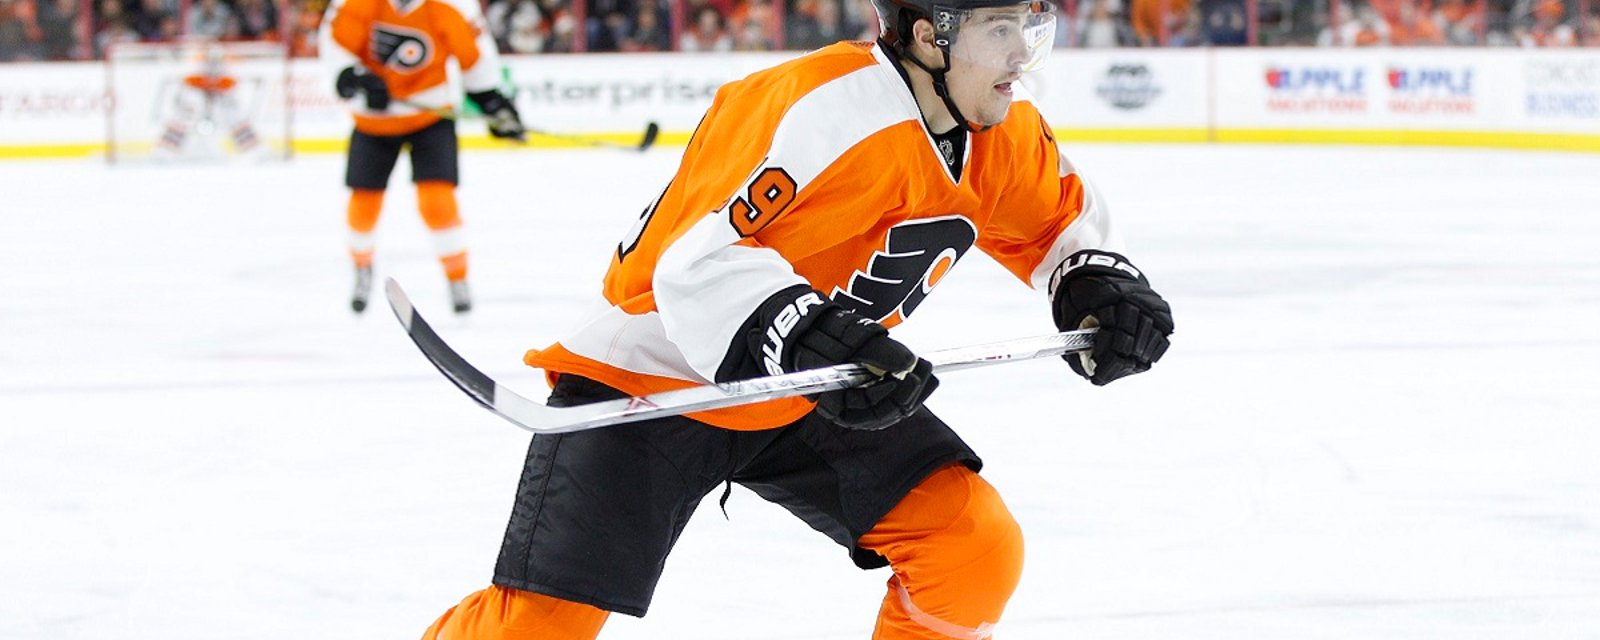 Breaking: Jordan Weal has made his choice, and it's extremely surprising!